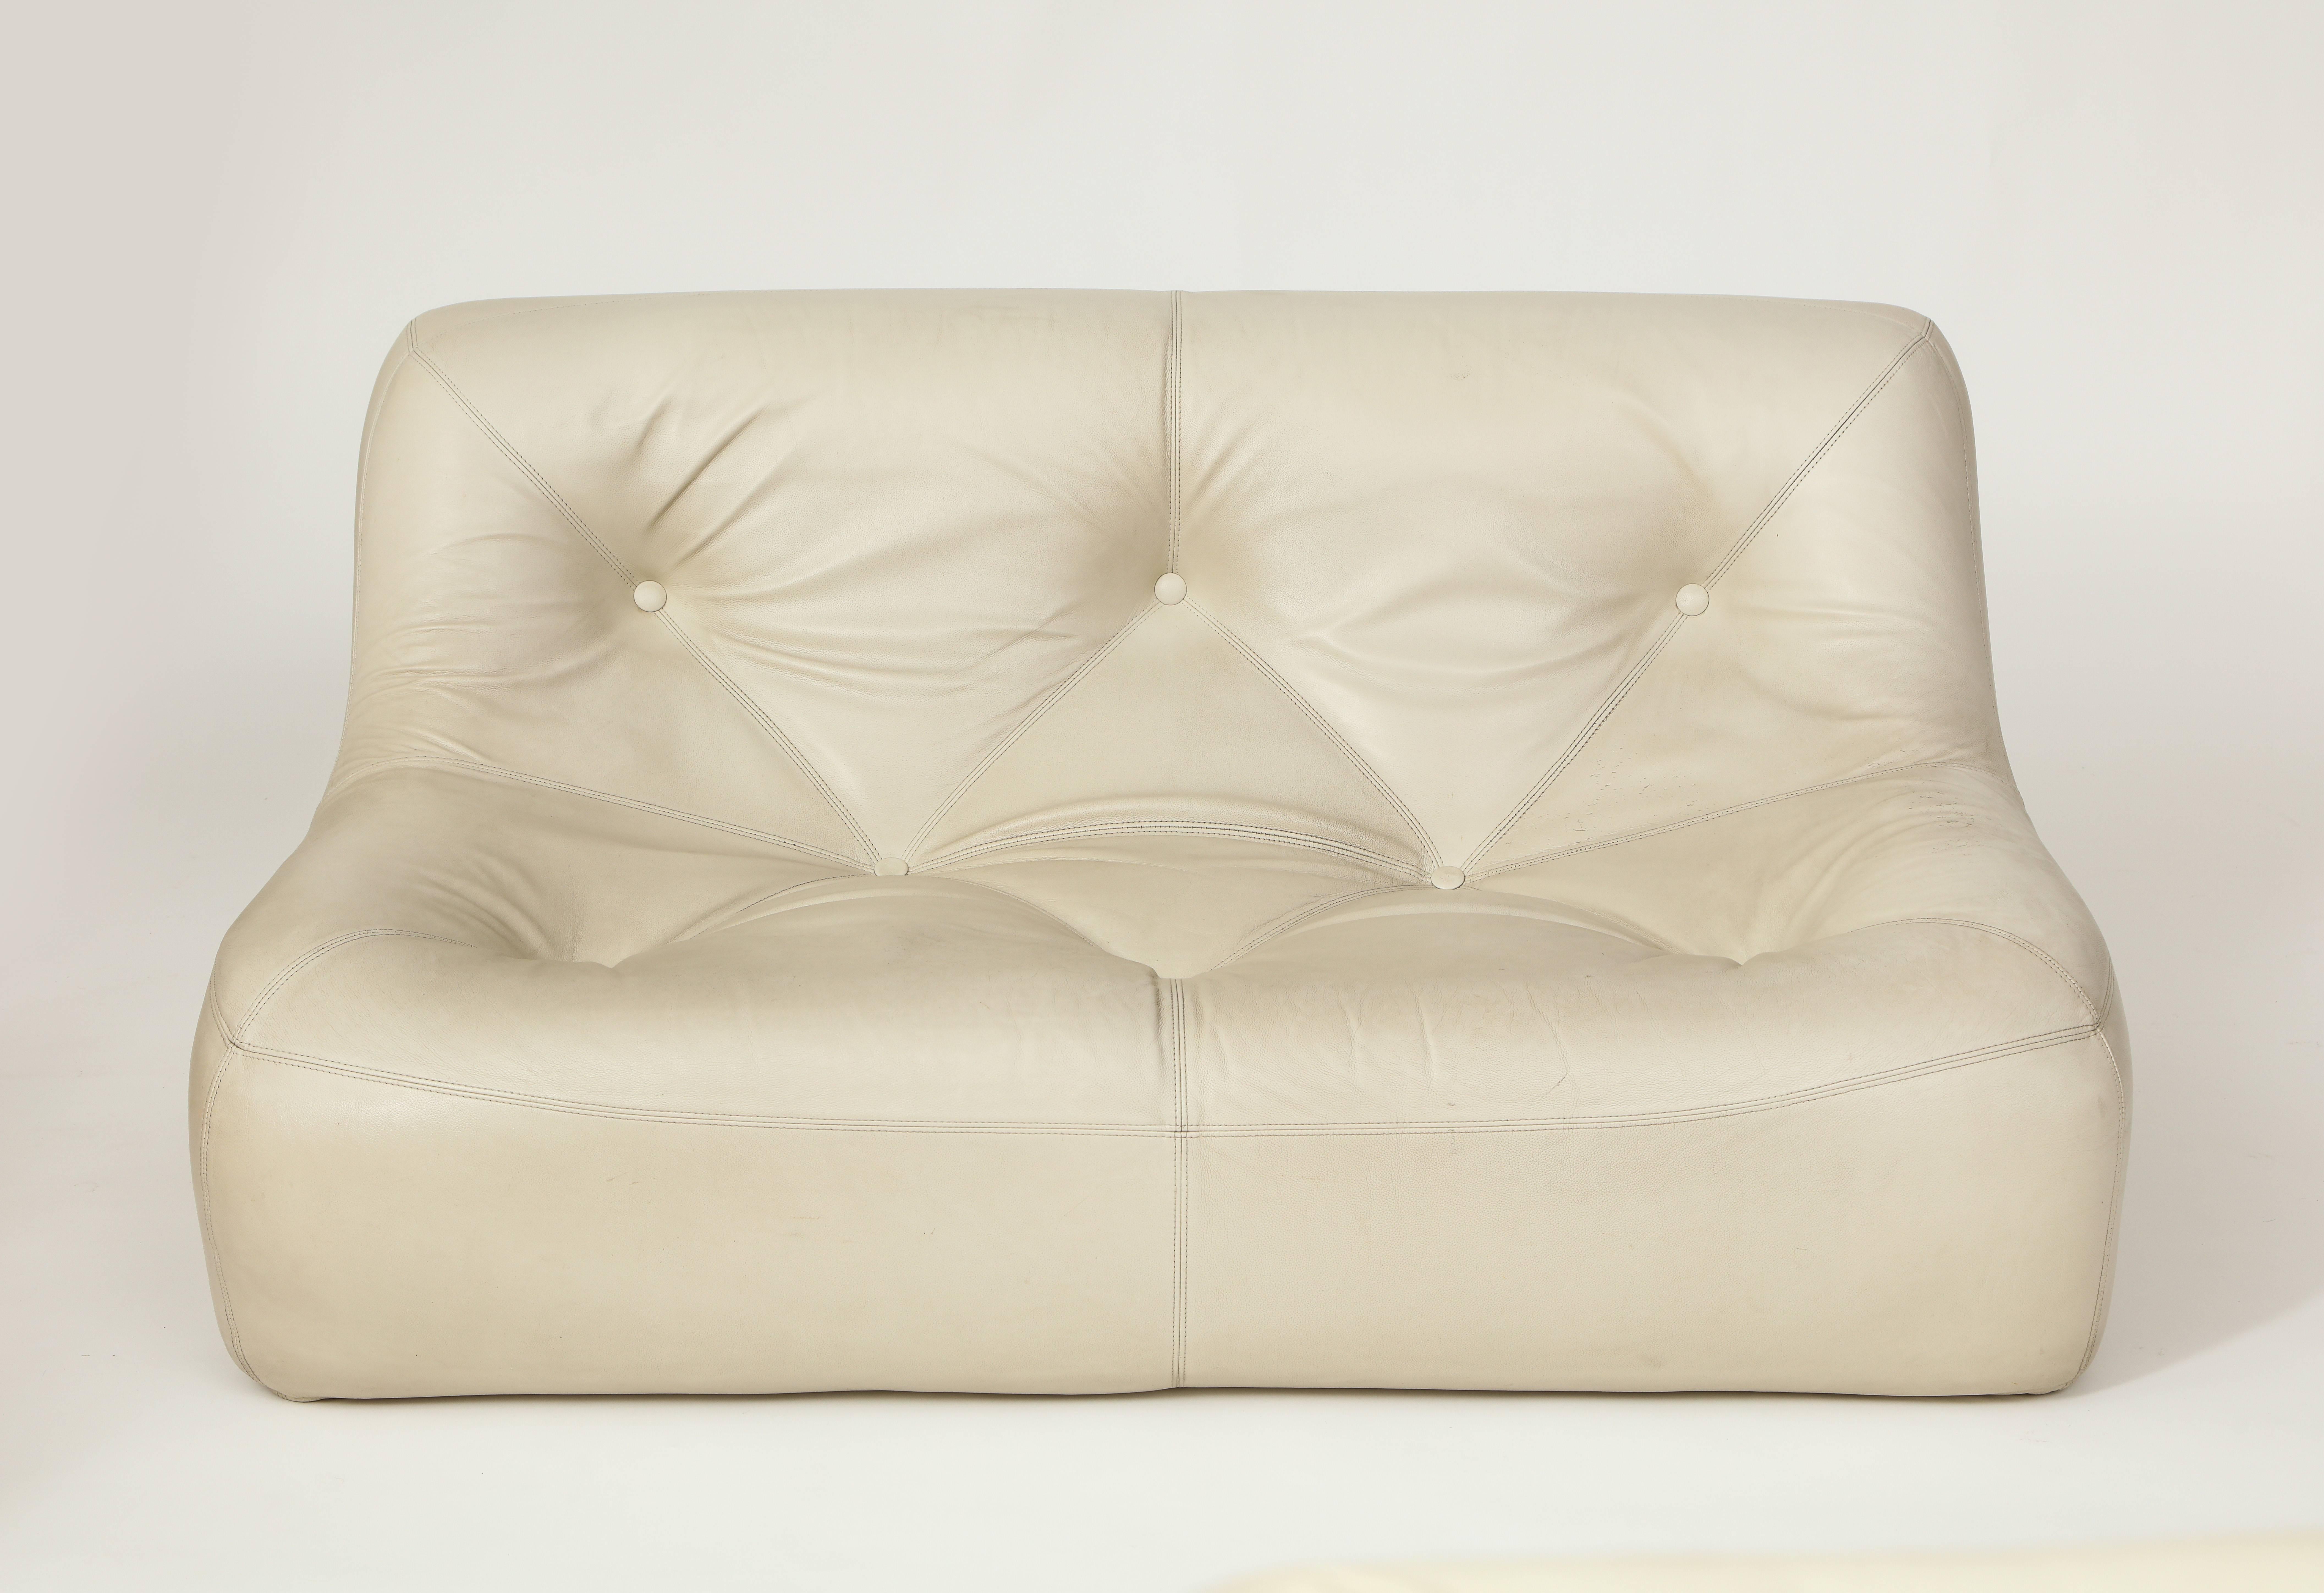 Ligne Roset white leather set Michel Ducaroy Kali chair sofa, 1970s, France

Rare Kali set. Beautiful condition white leather and extremely comfortable. 
Two chairs, one ottoman and one sofa/settee. 
This is a rare vintage